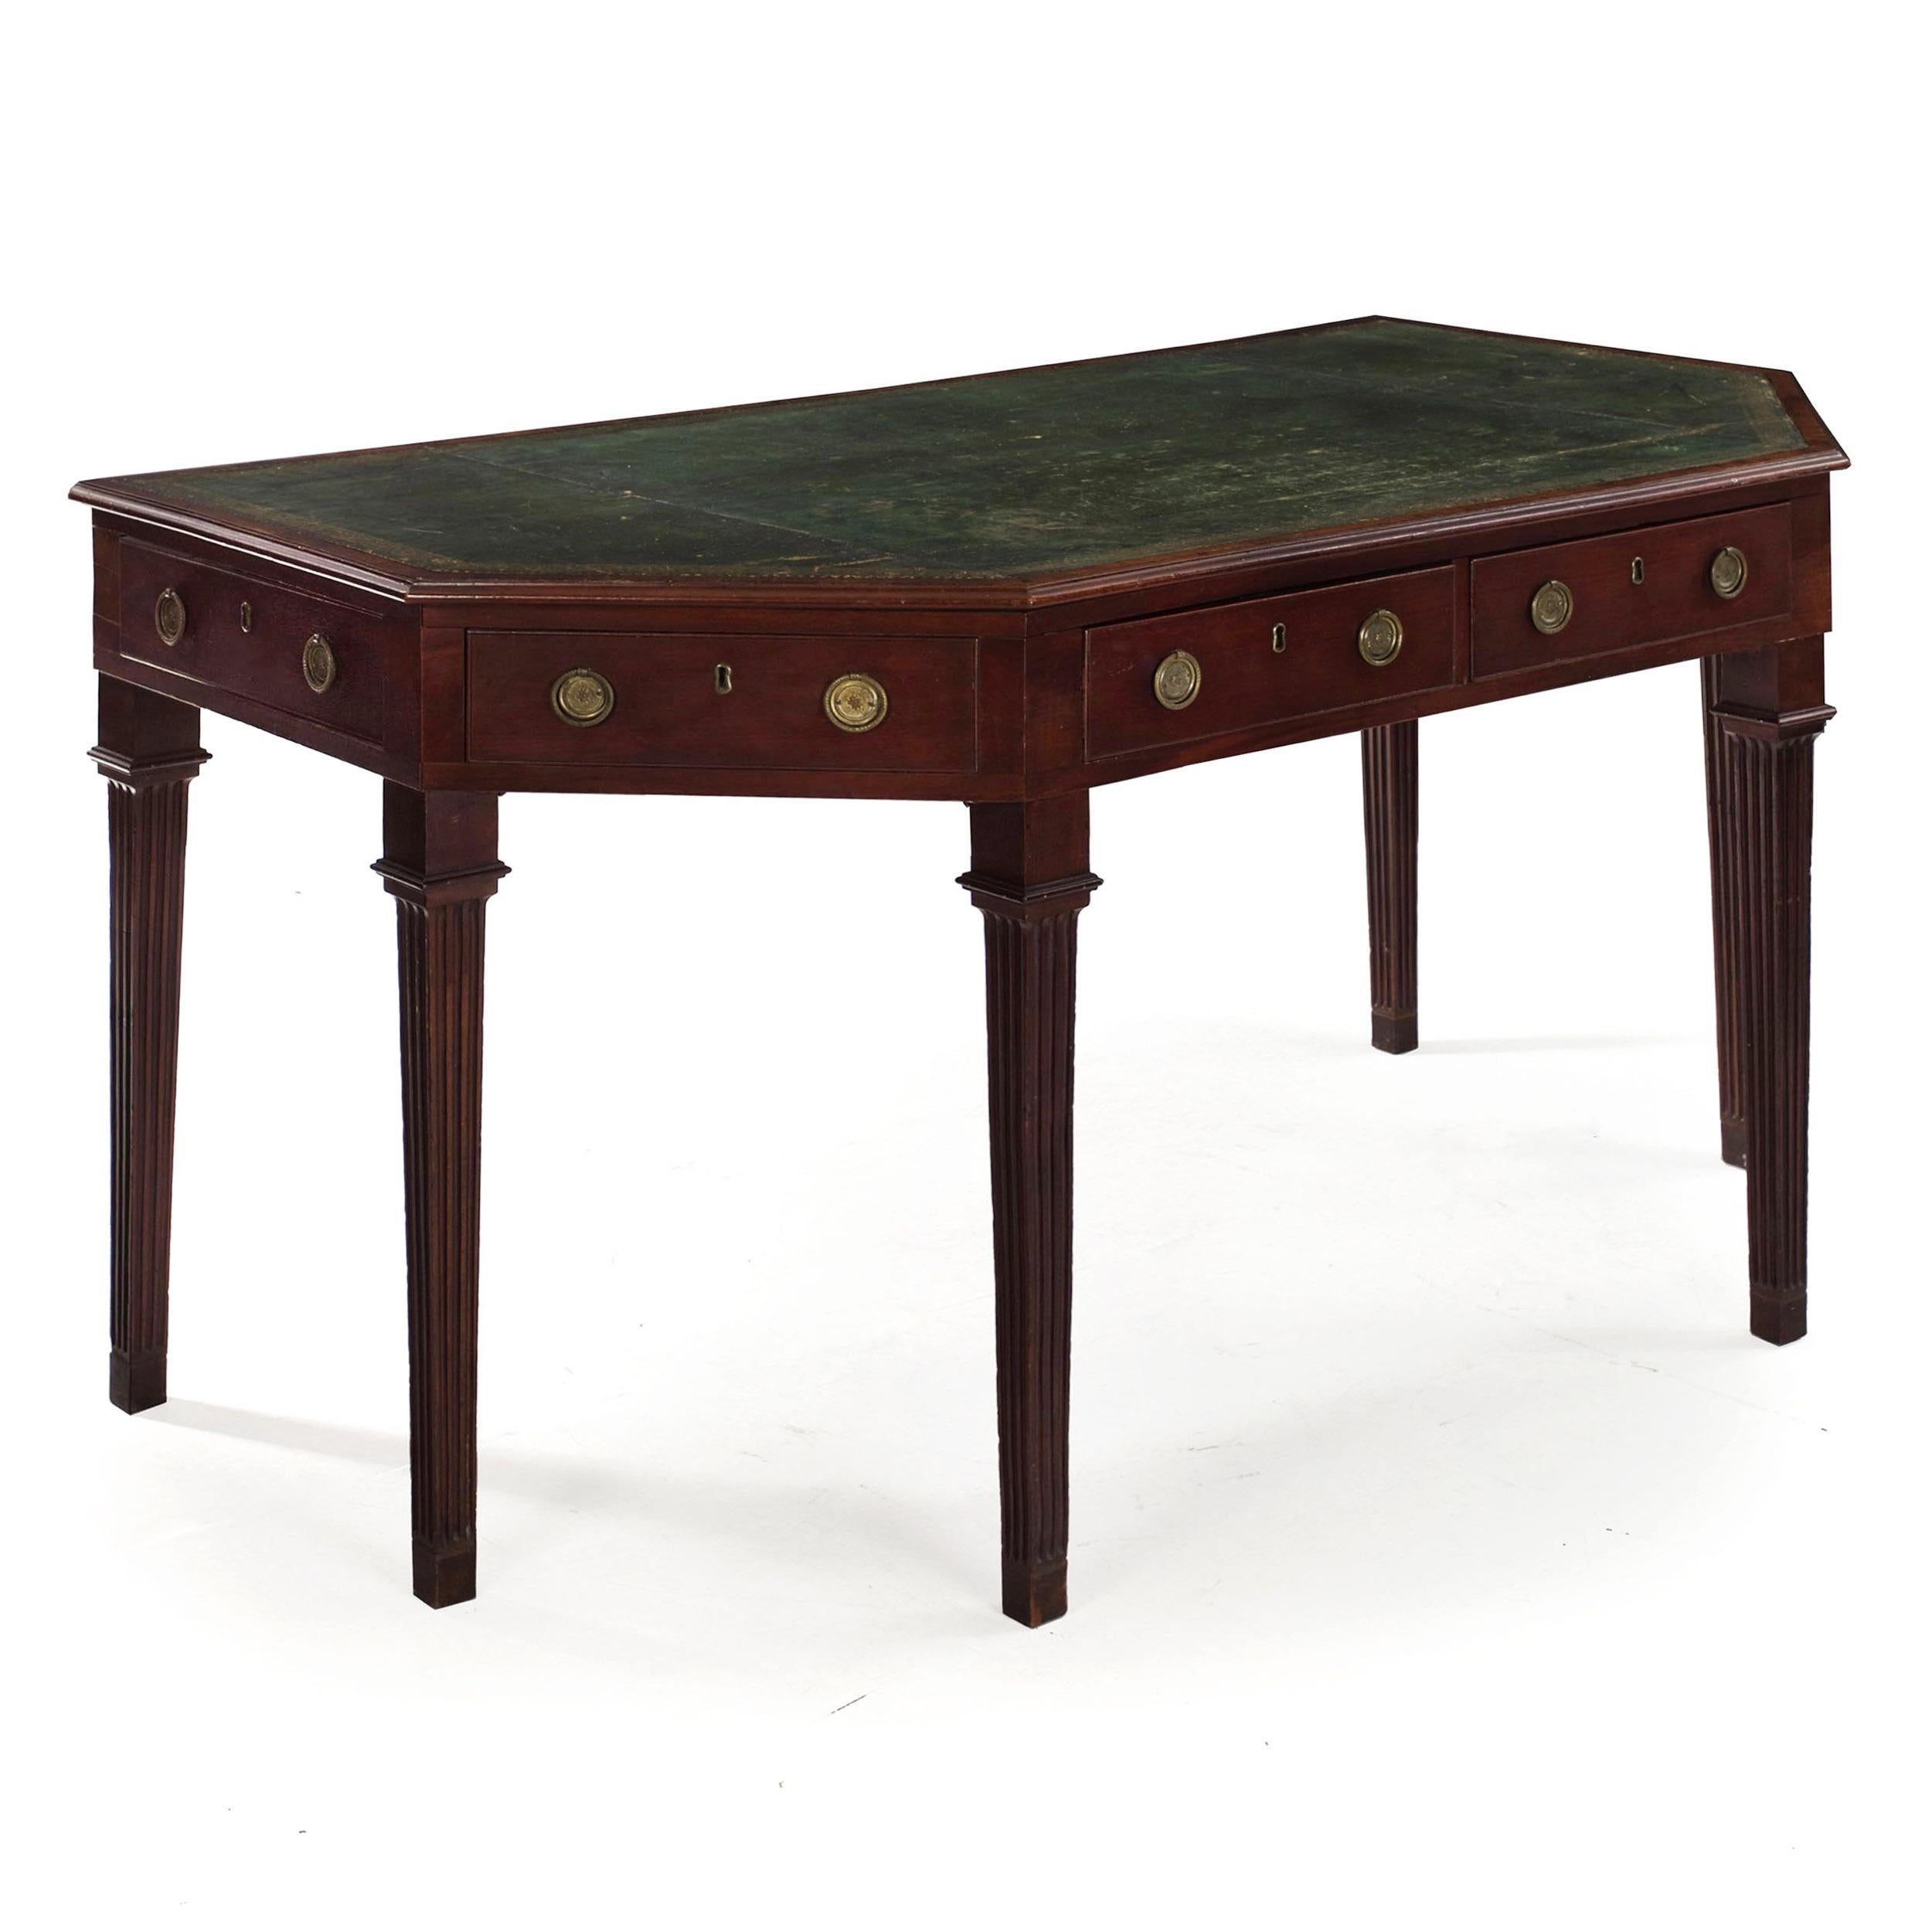 A superb writing desk preserved in excellent original condition, this fine George III period work features a faceted mahogany facade with a conforming leather writing surface situated over six drawers and raised on tapered-fluted legs.

The green